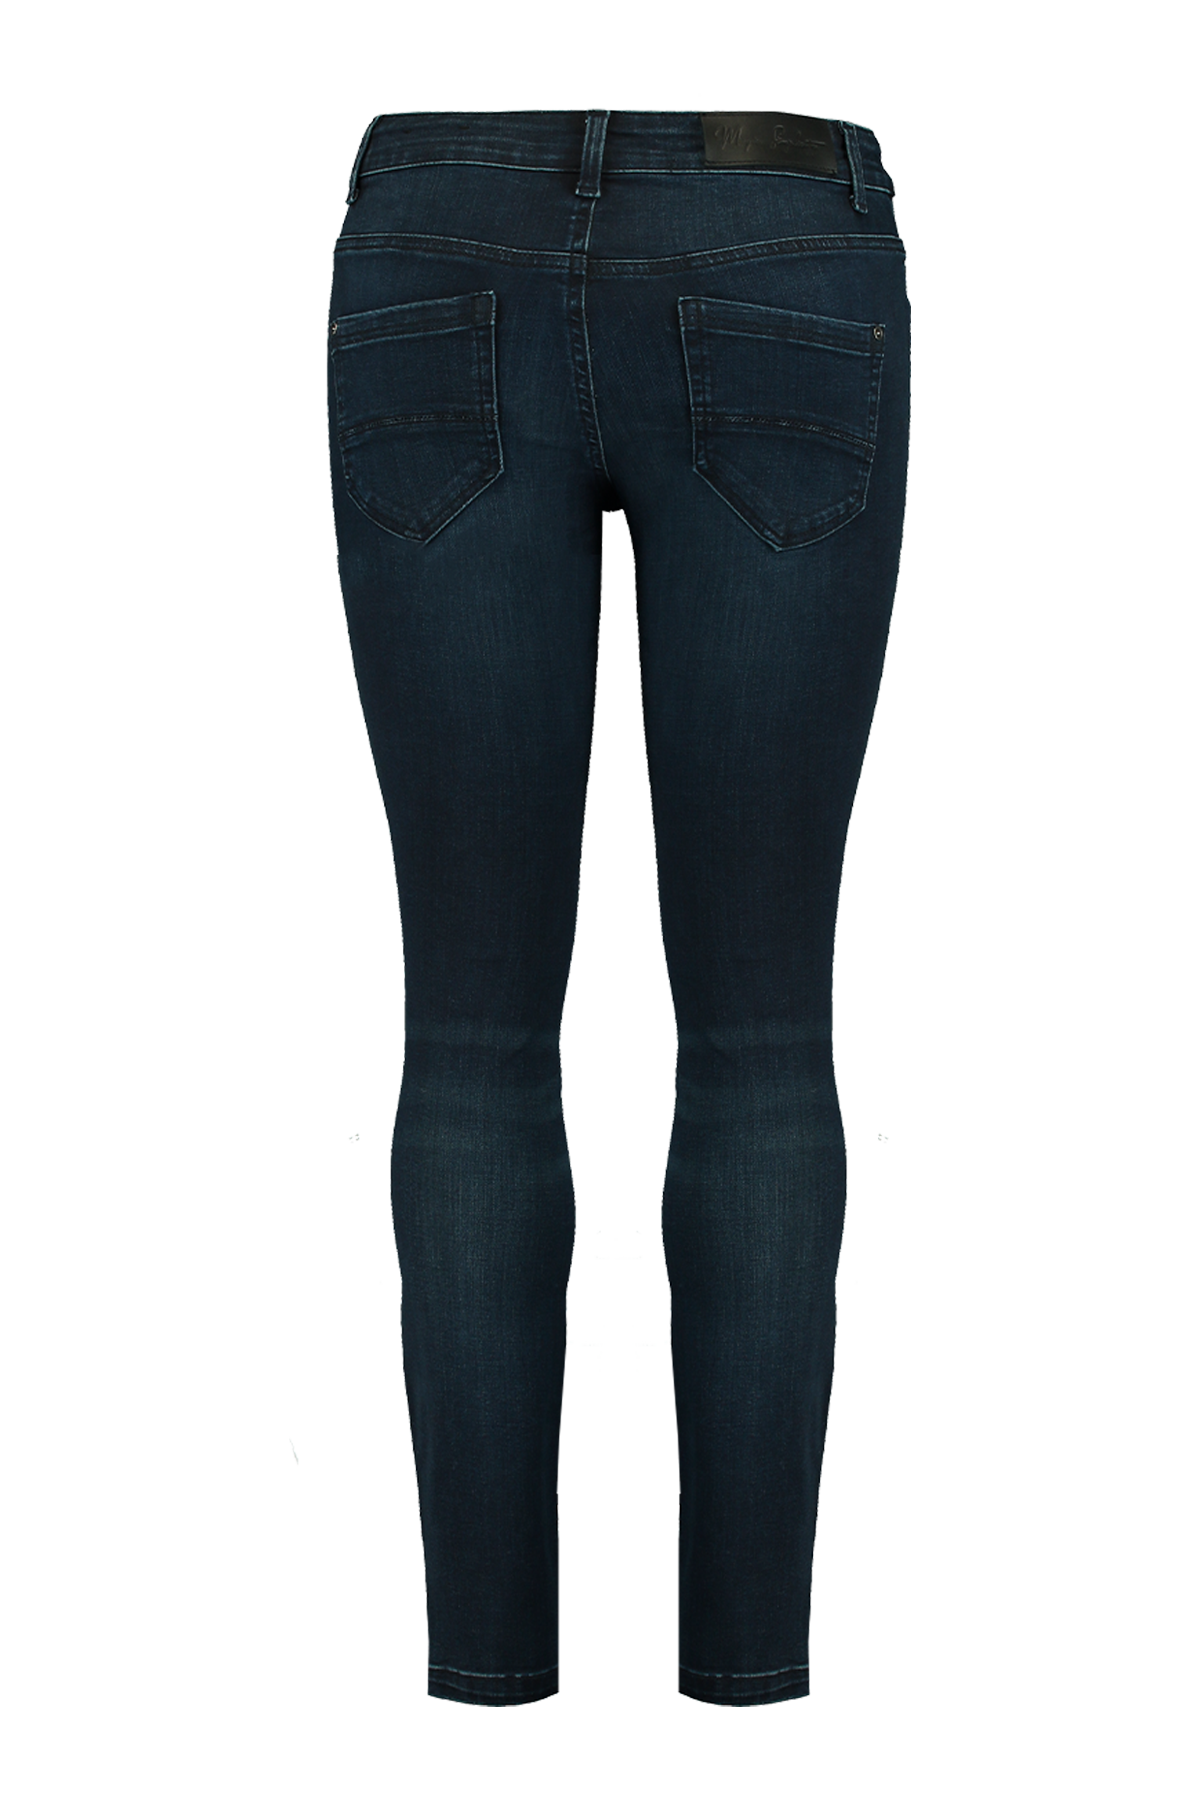 Skinny leg jeans SHAPES  image number null